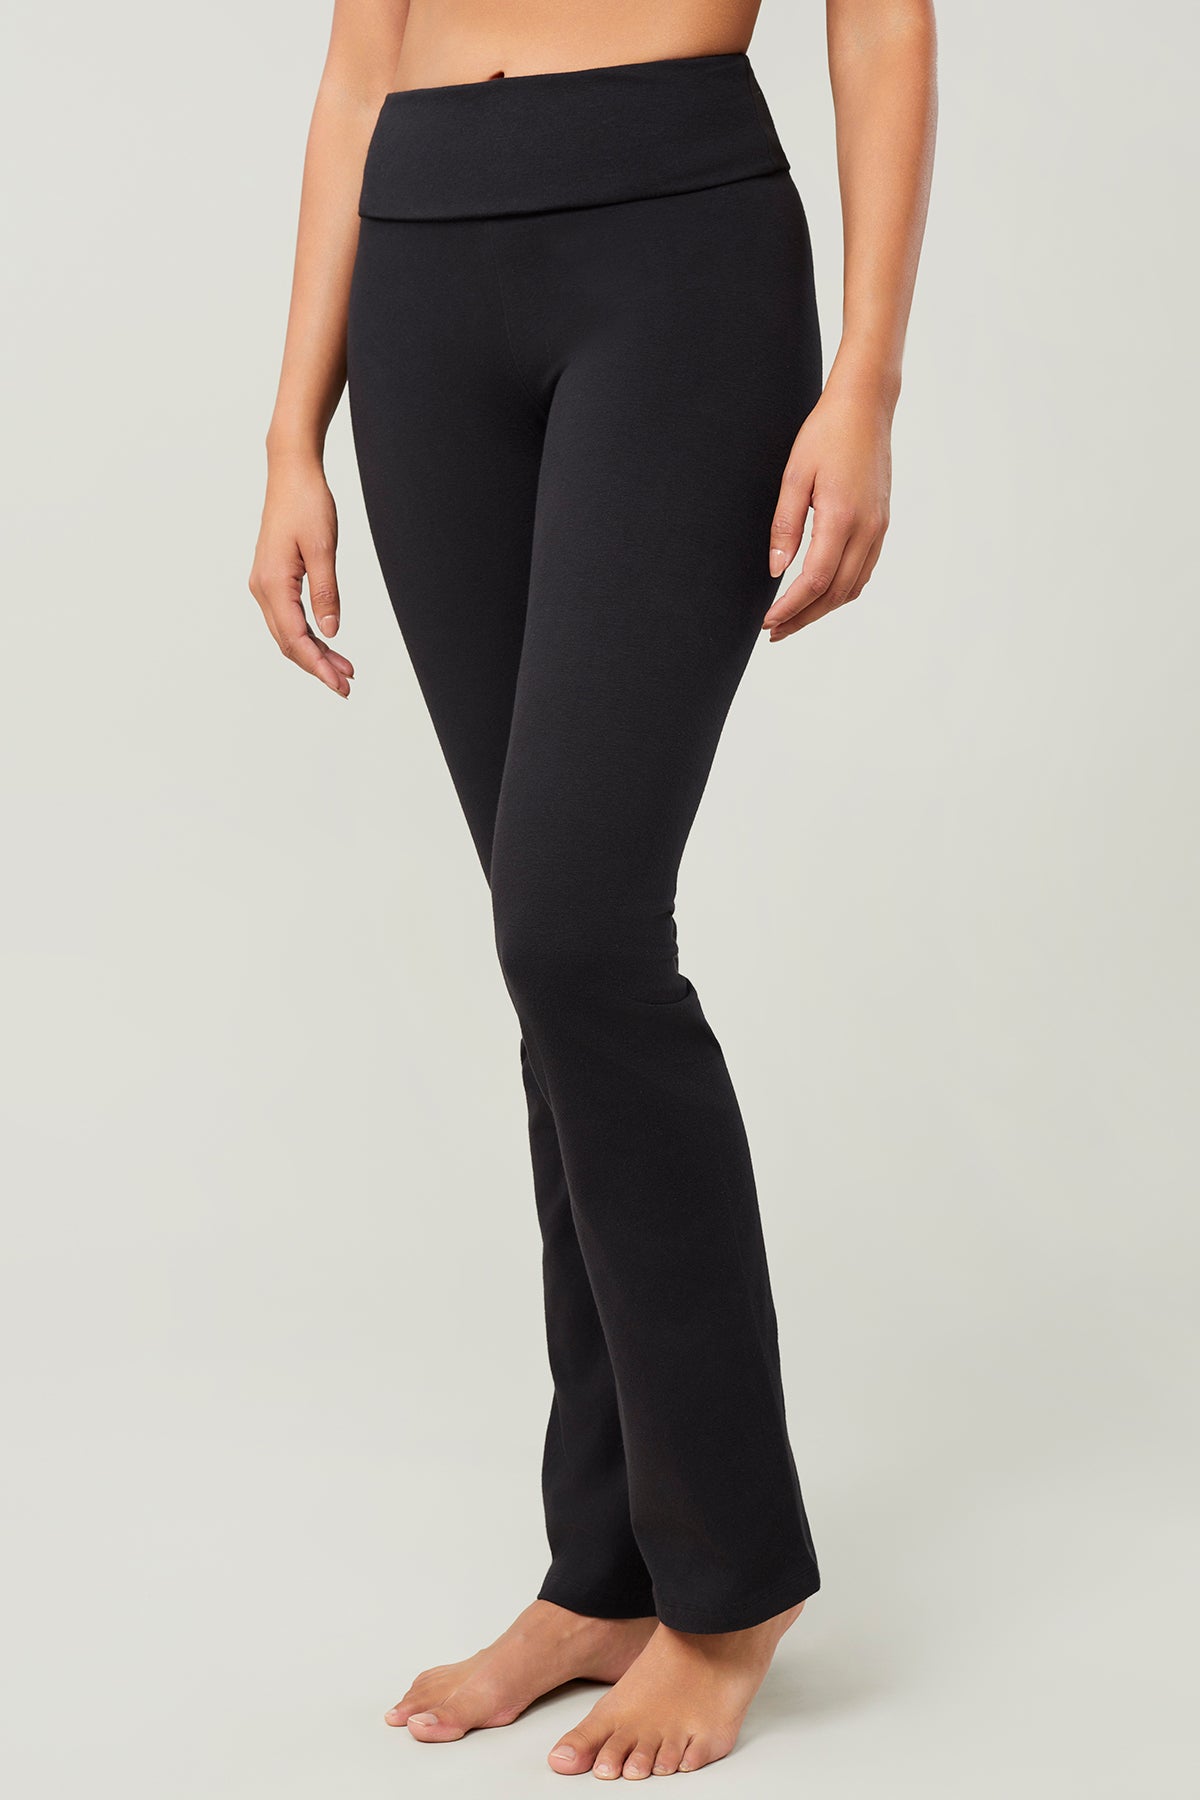 Eco Yoga Leggings with perfect fit